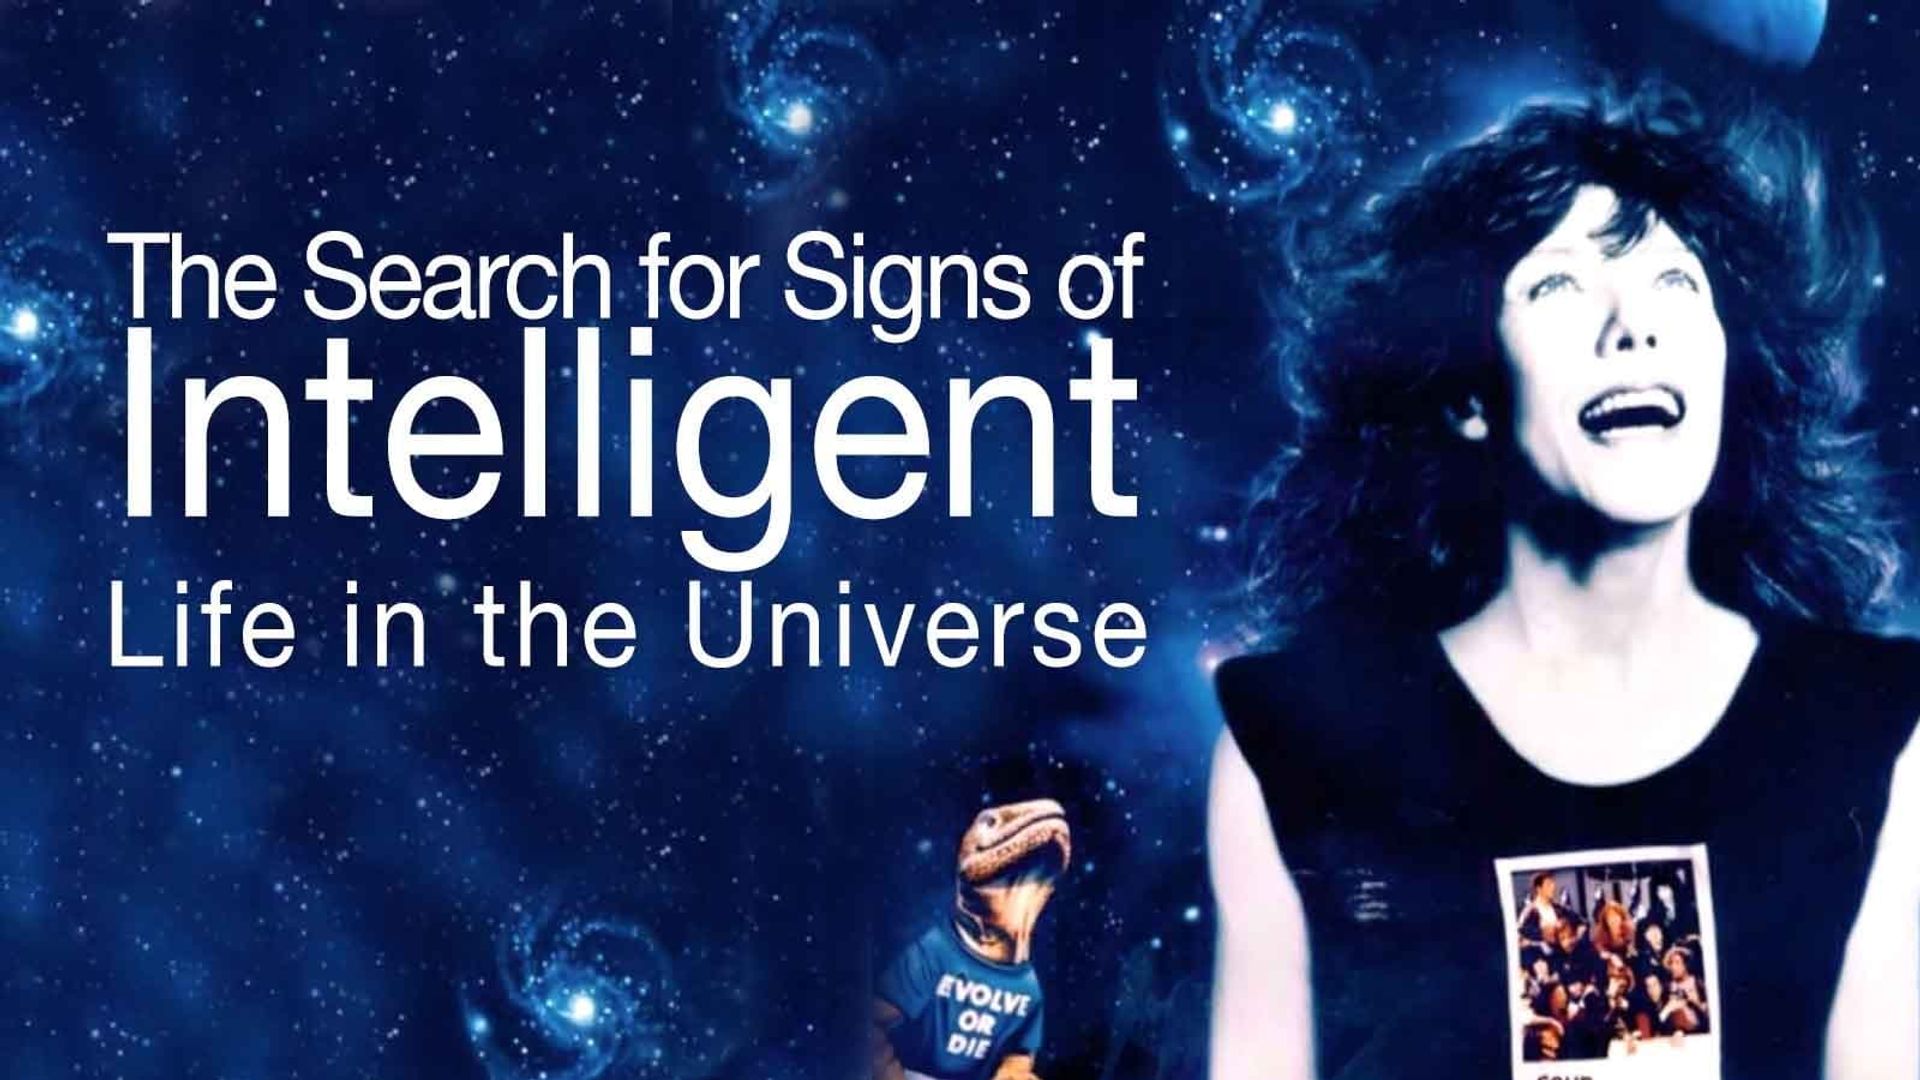 The Search for Signs of Intelligent Life in the Universe background